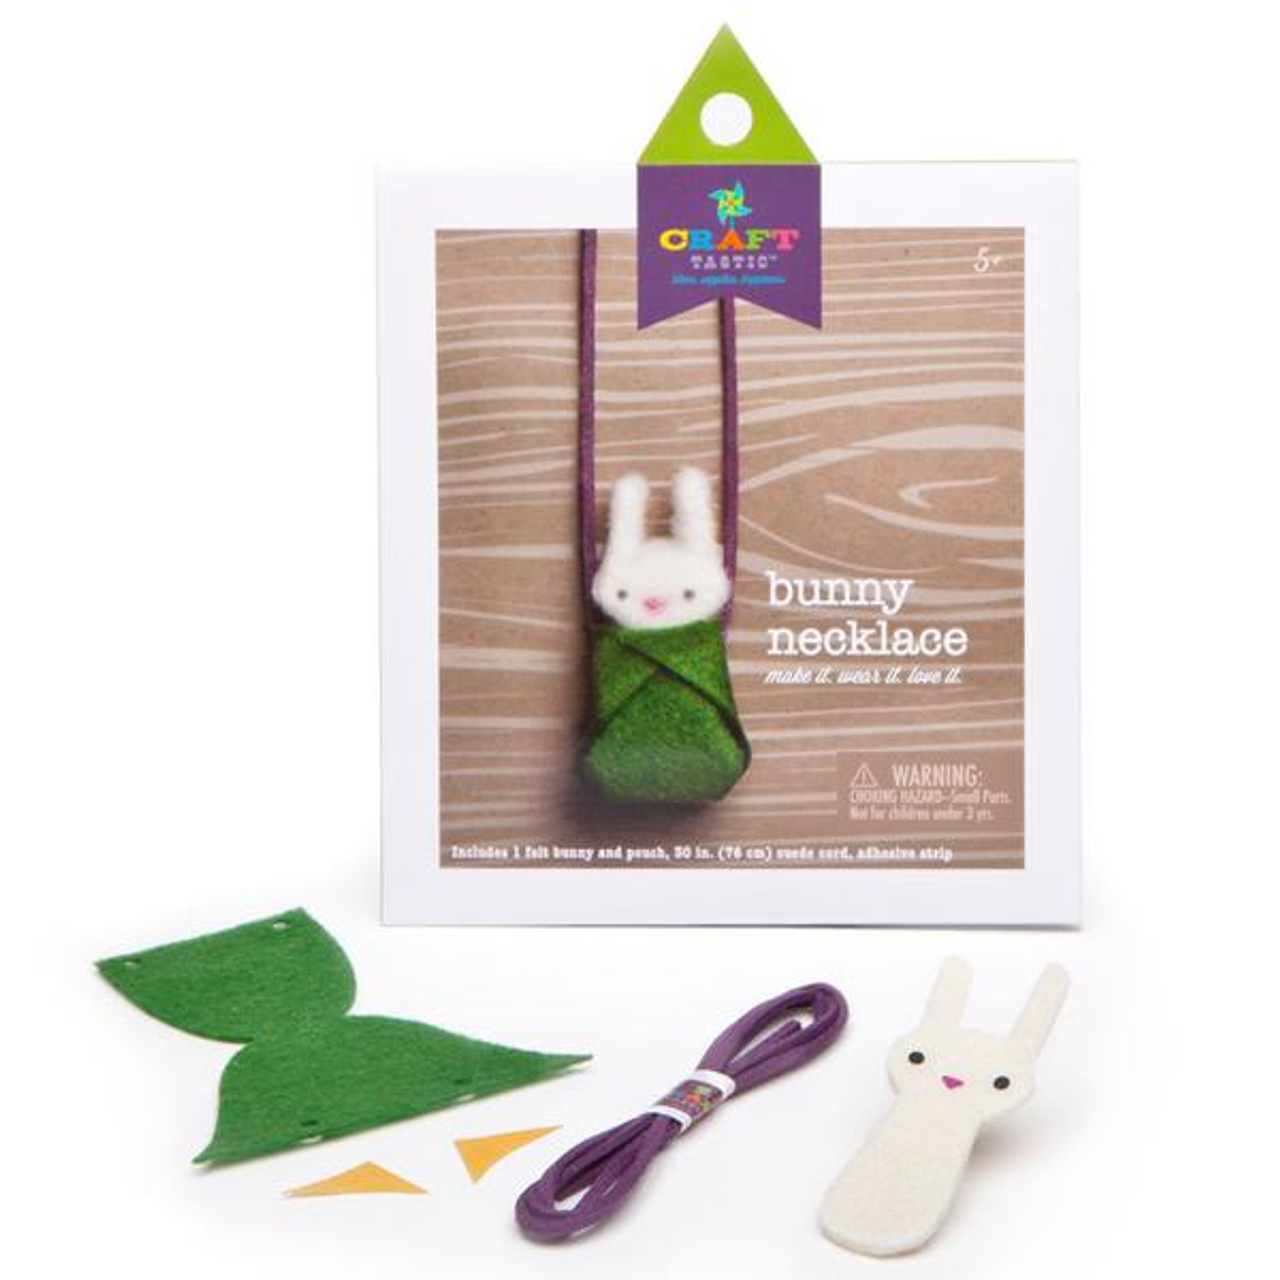 Craft-tastic Bunny Necklace Kit